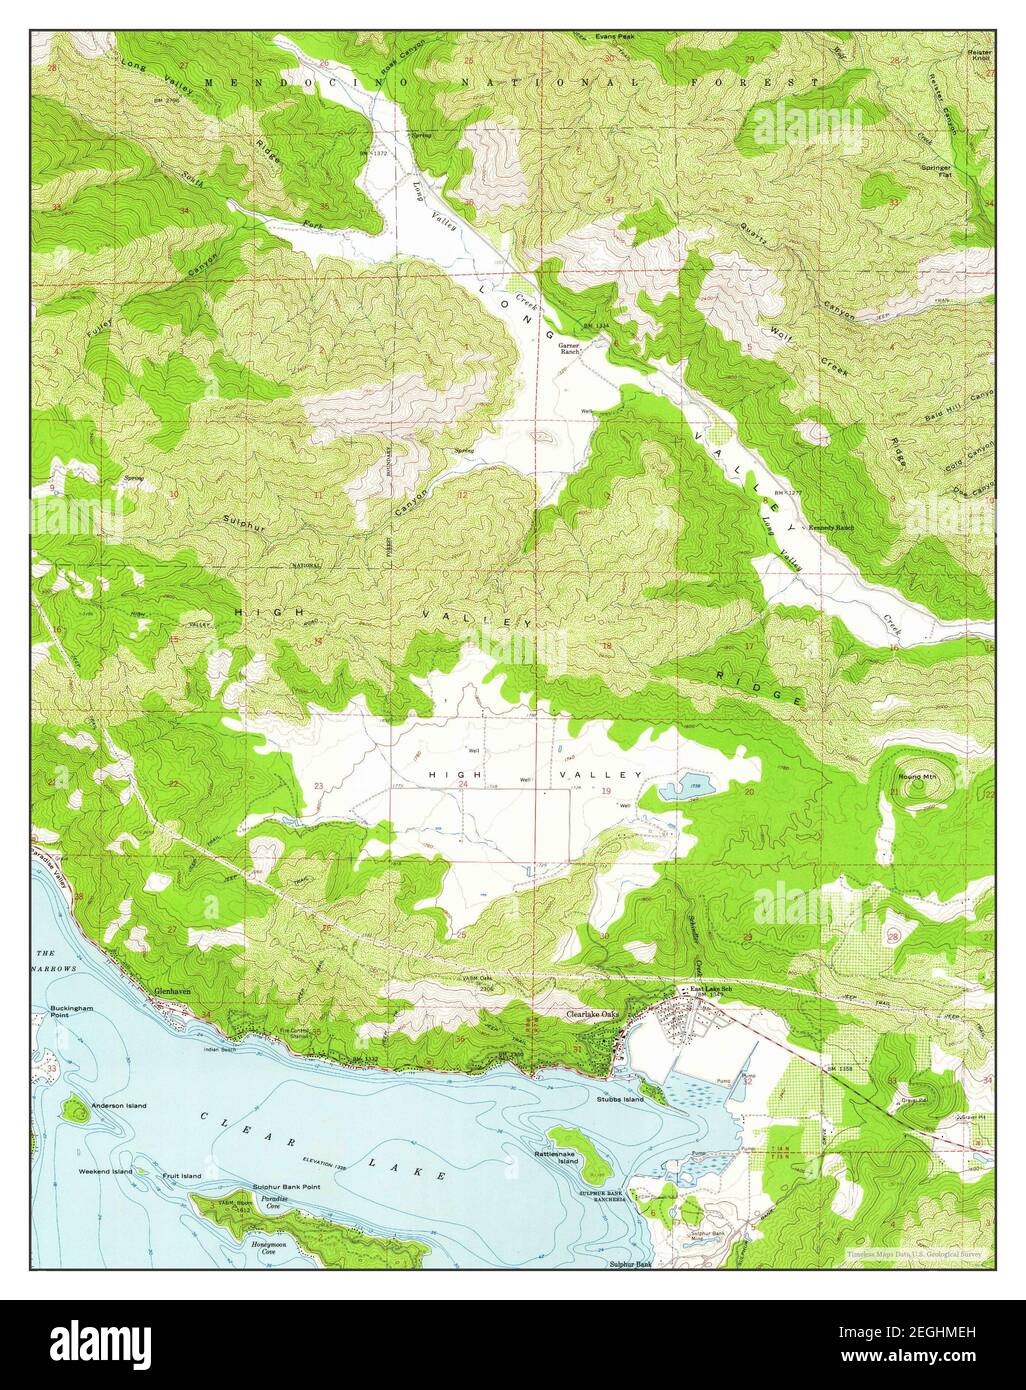 Clearlake Oaks, California, map 1958, 1:24000, United States of America by Timeless Maps, data U.S. Geological Survey Stock Photo